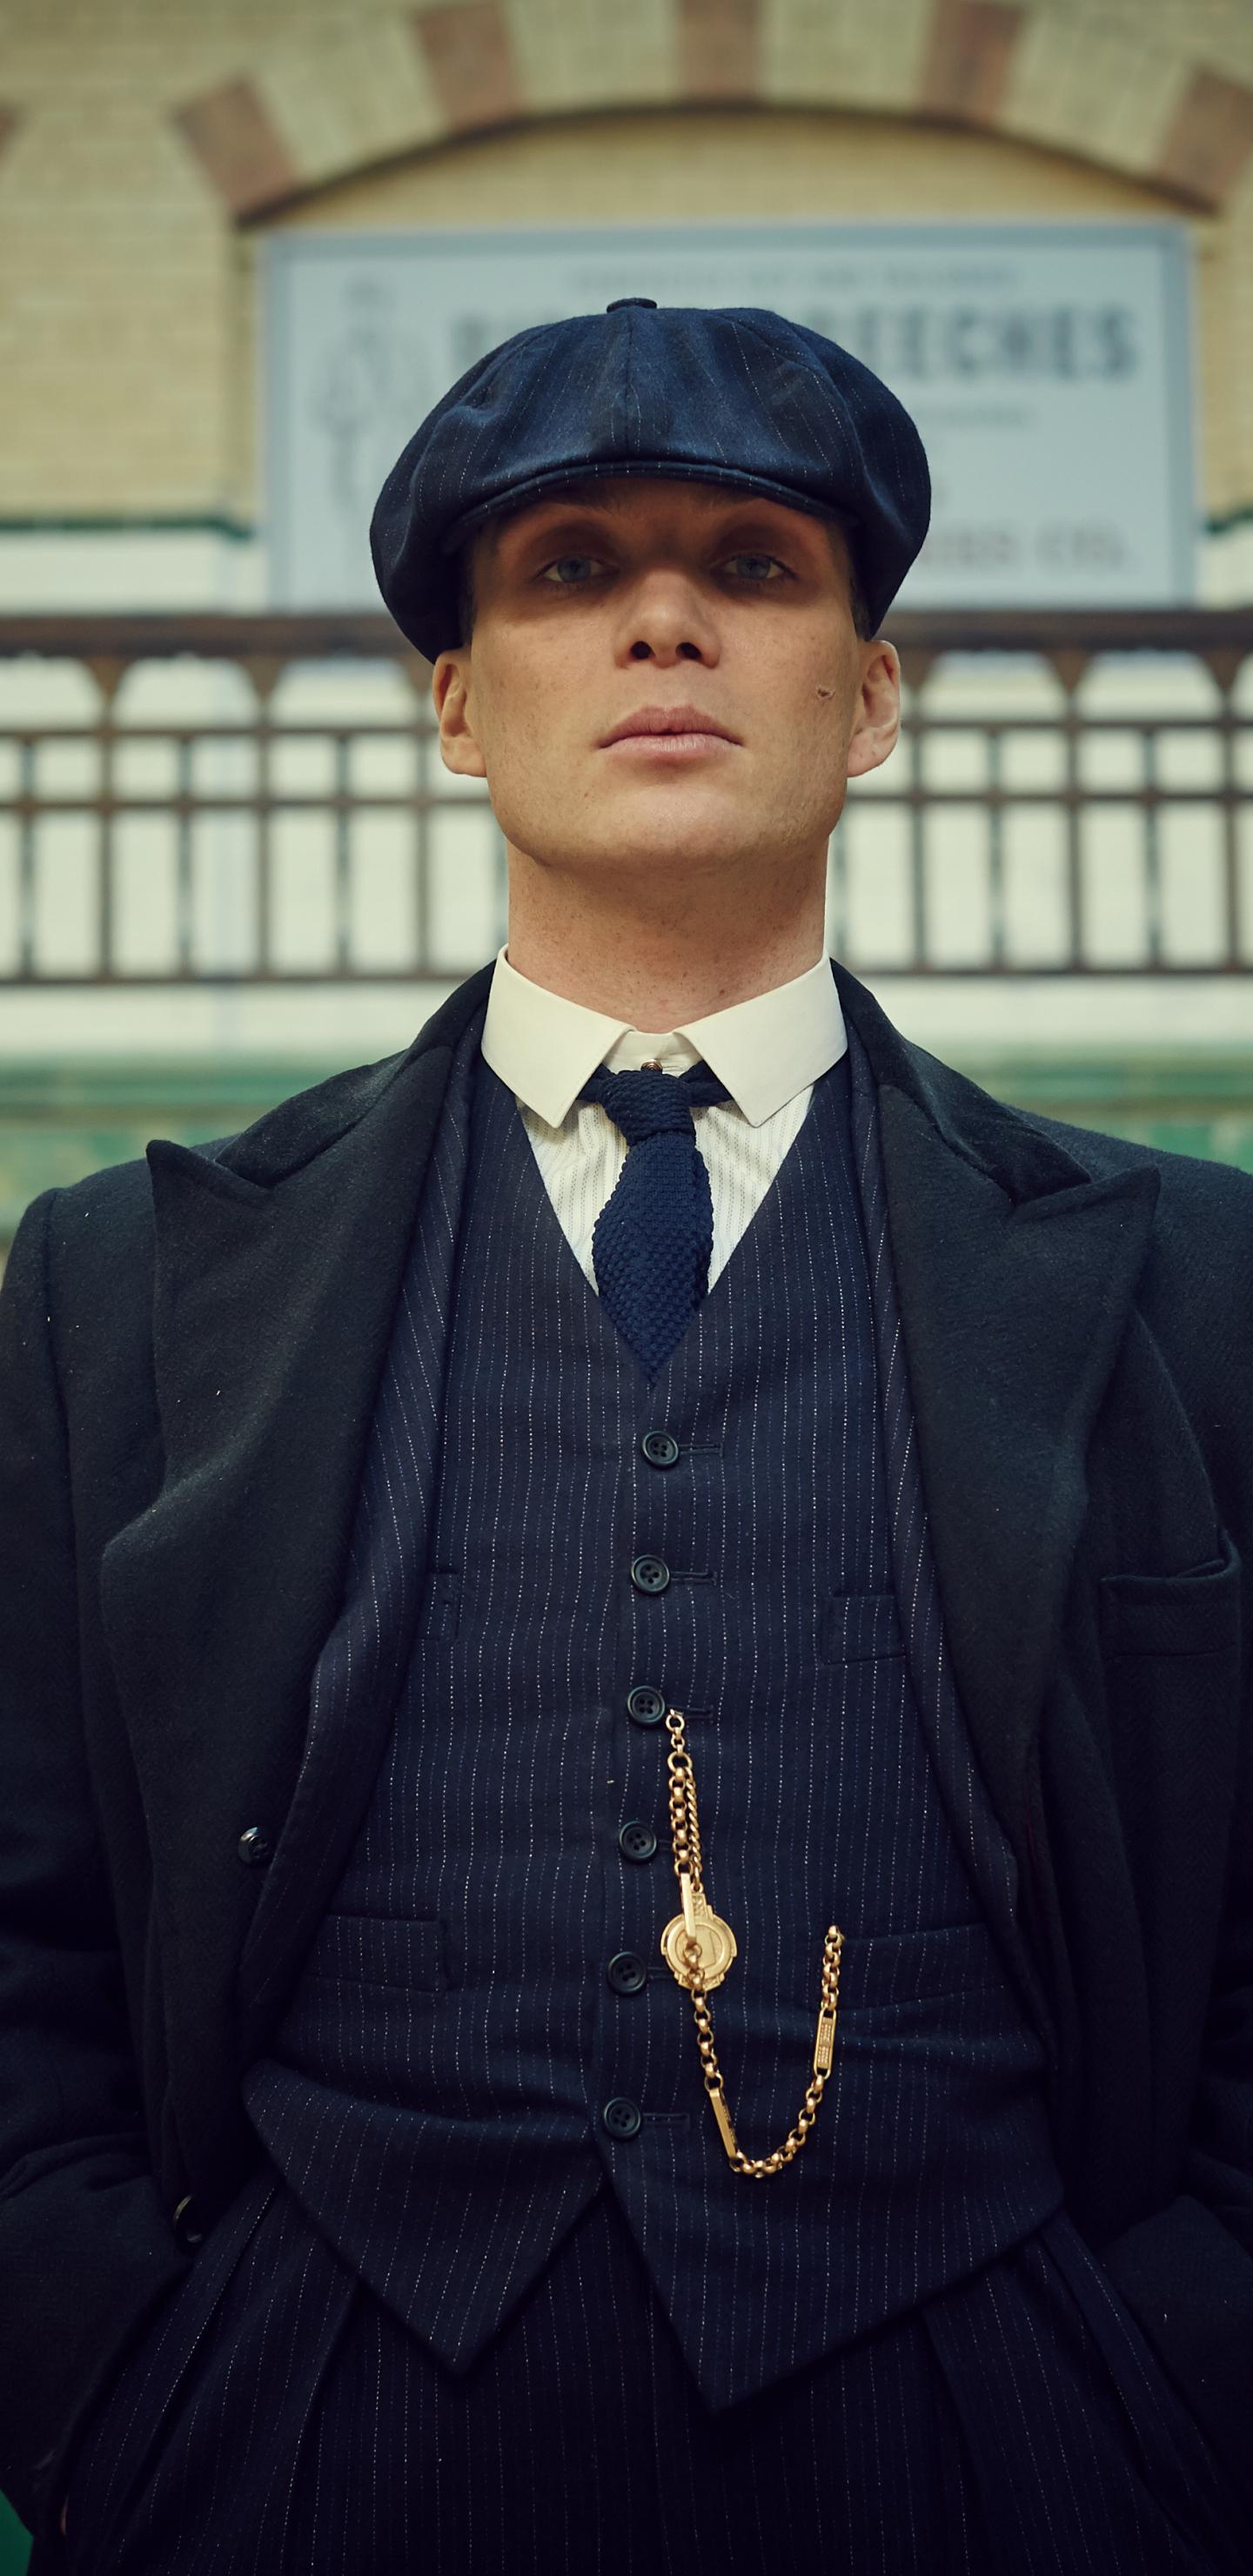 Tommy Shelby Quotes Wallpapers - Top Những Hình Ảnh Đẹp